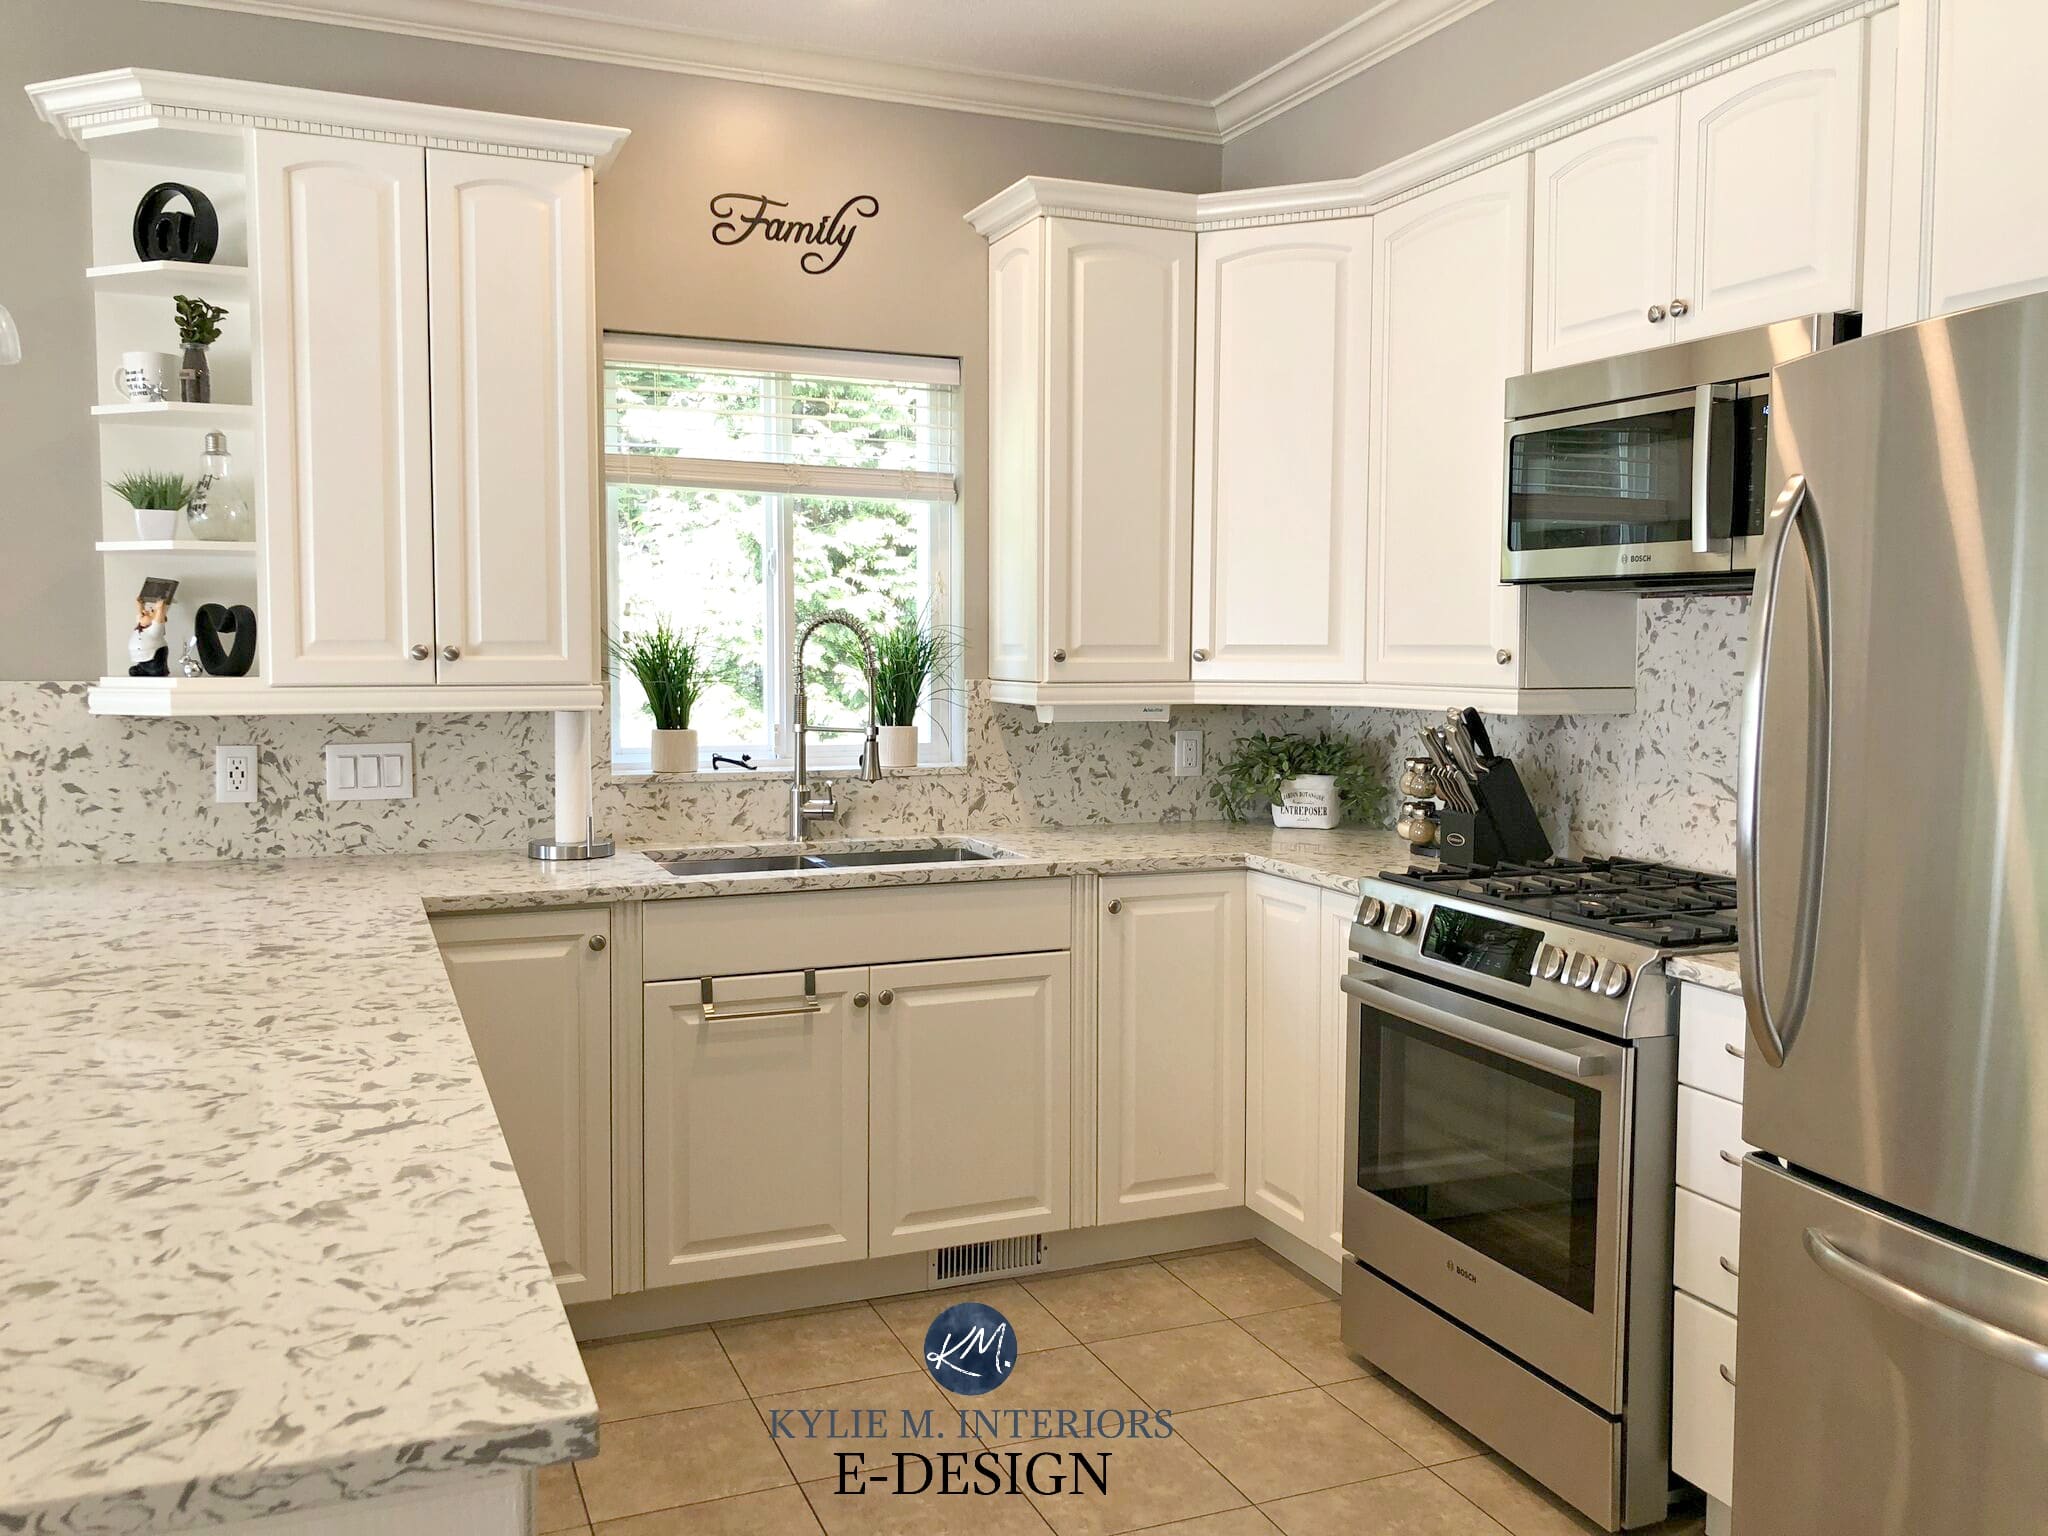 Kylie M Interiors Edesign, online consulting. Oak cathedral arched style cabinets updated and painted with Benjamin Moore White Dove, TCE Quartz 3001, beige porcelain tile, stainless steel.